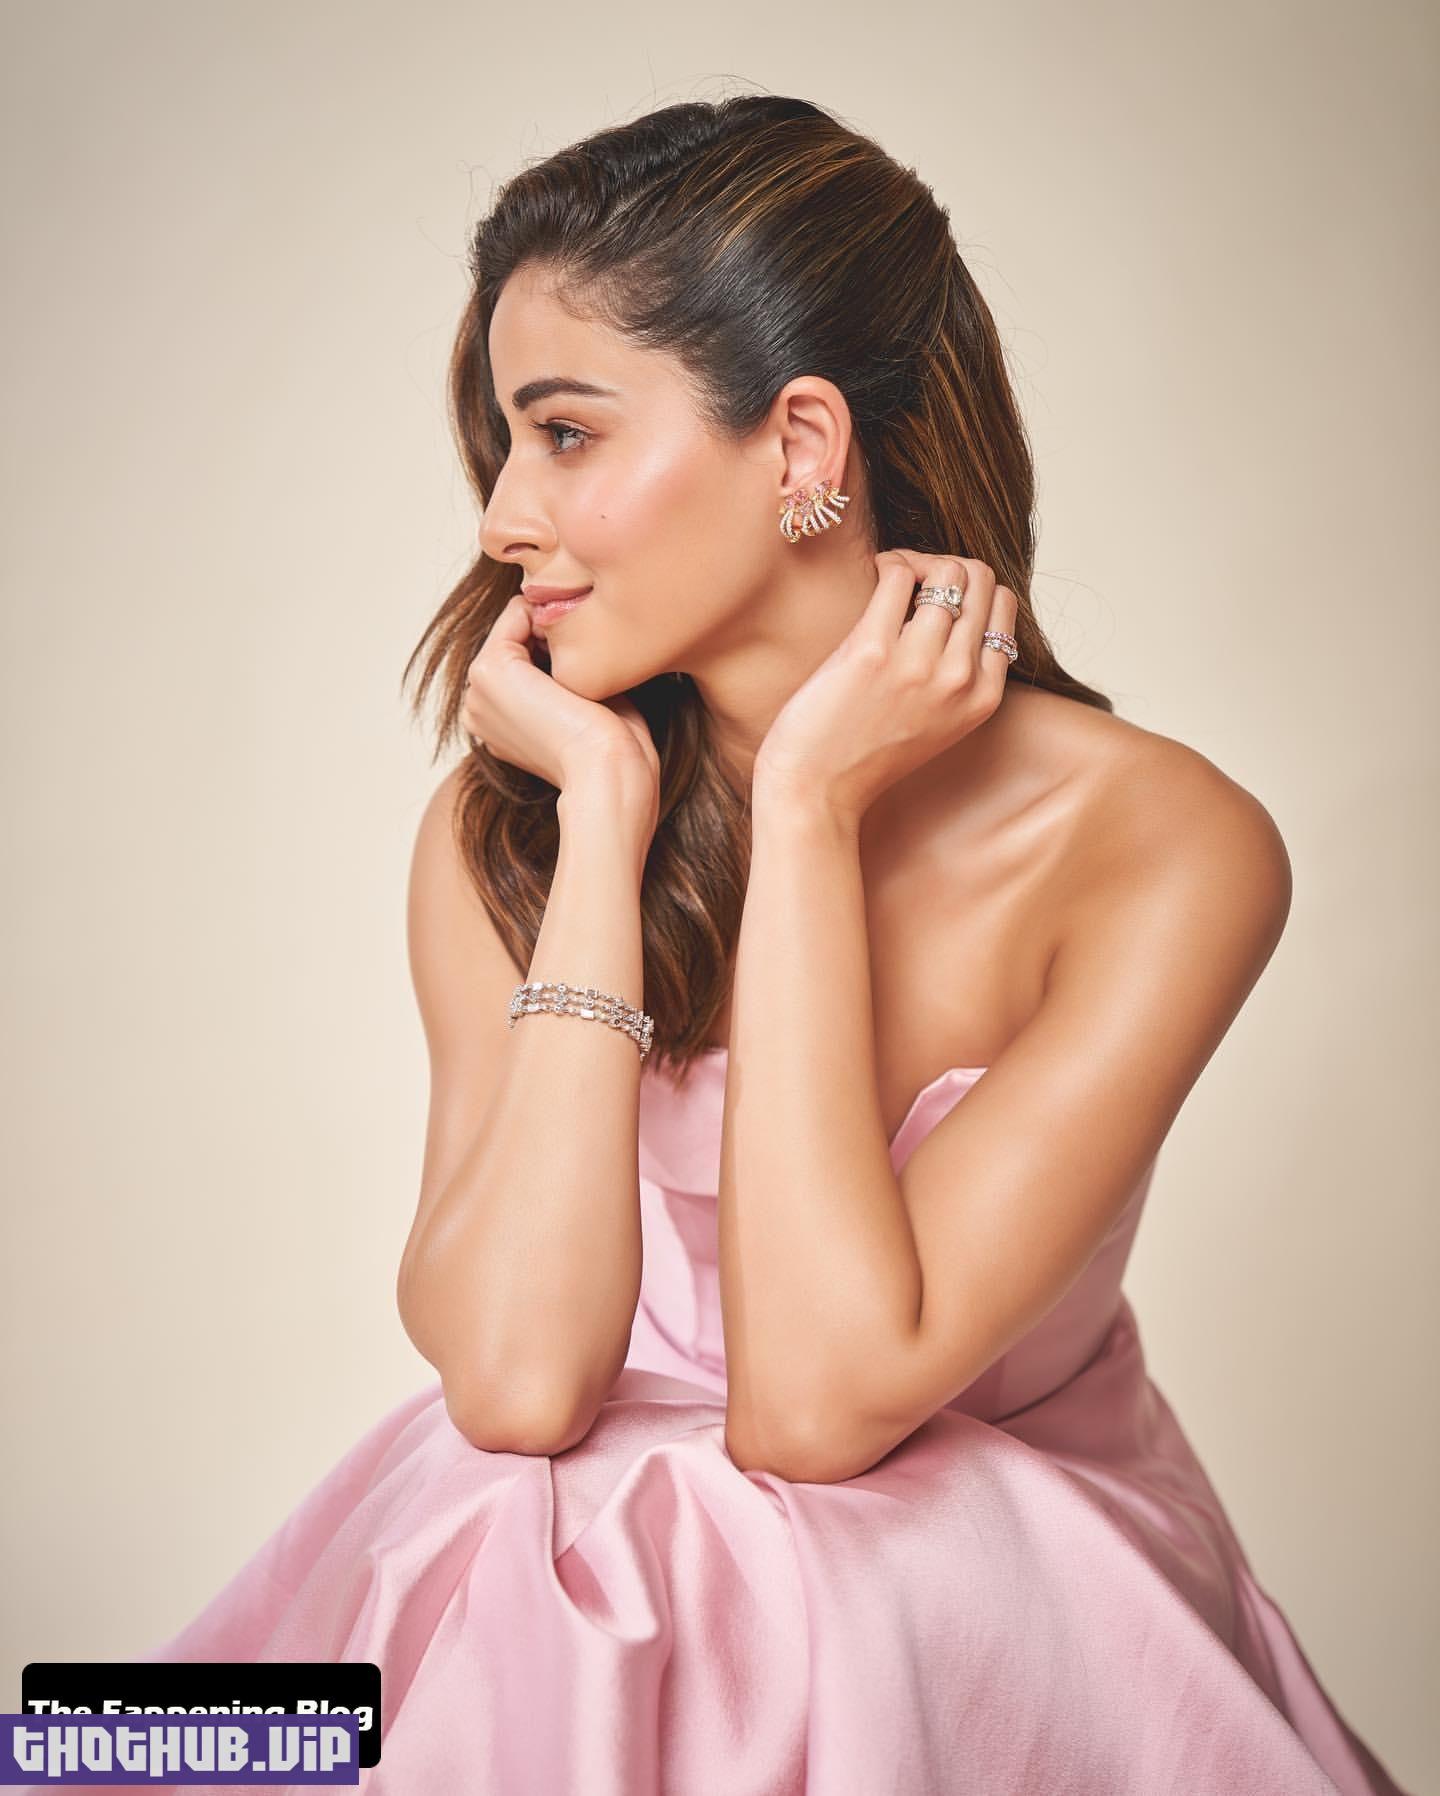 Ananya Panday Sexy The Fappening Blog 6